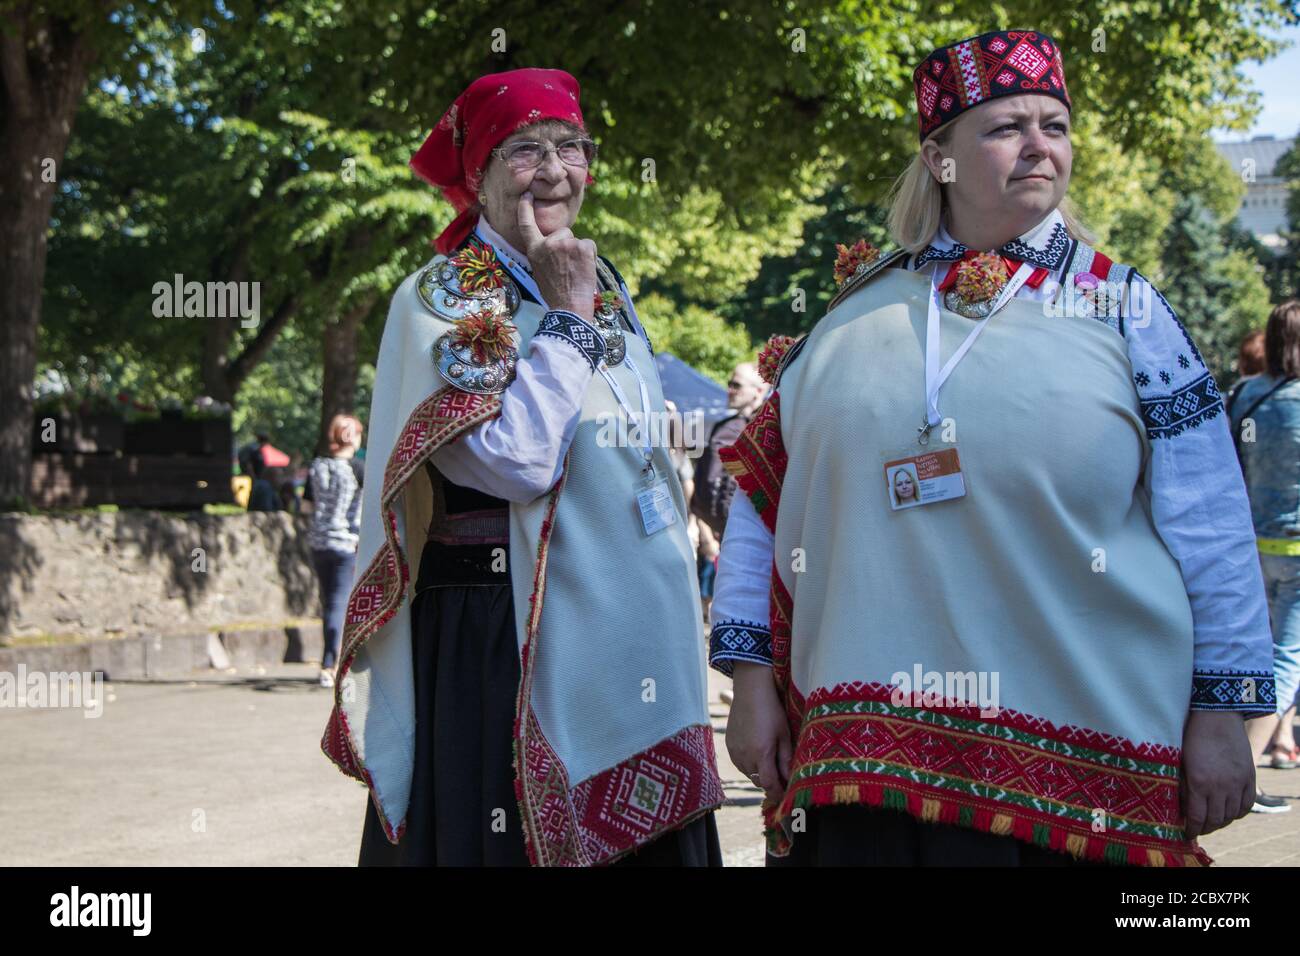 https://c8.alamy.com/comp/2CBX7PK/senior-woman-and-a-young-woman-in-national-latvian-clothes-are-walking-in-a-city-park-2CBX7PK.jpg